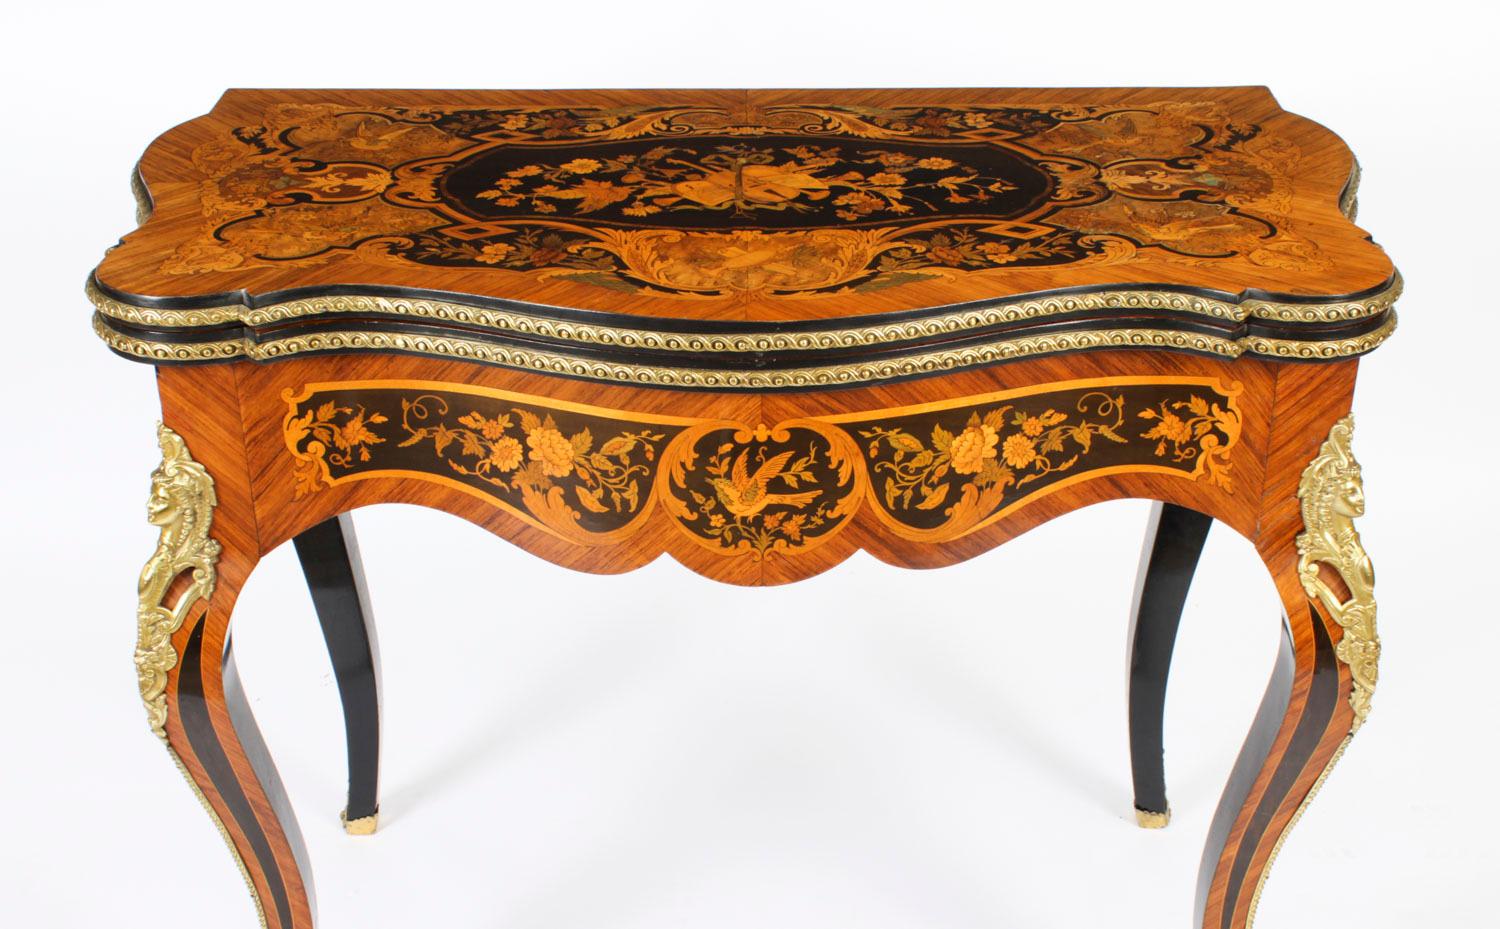 Wood Antique French Louis Revival Floral Marquetry Card Table 19th C For Sale